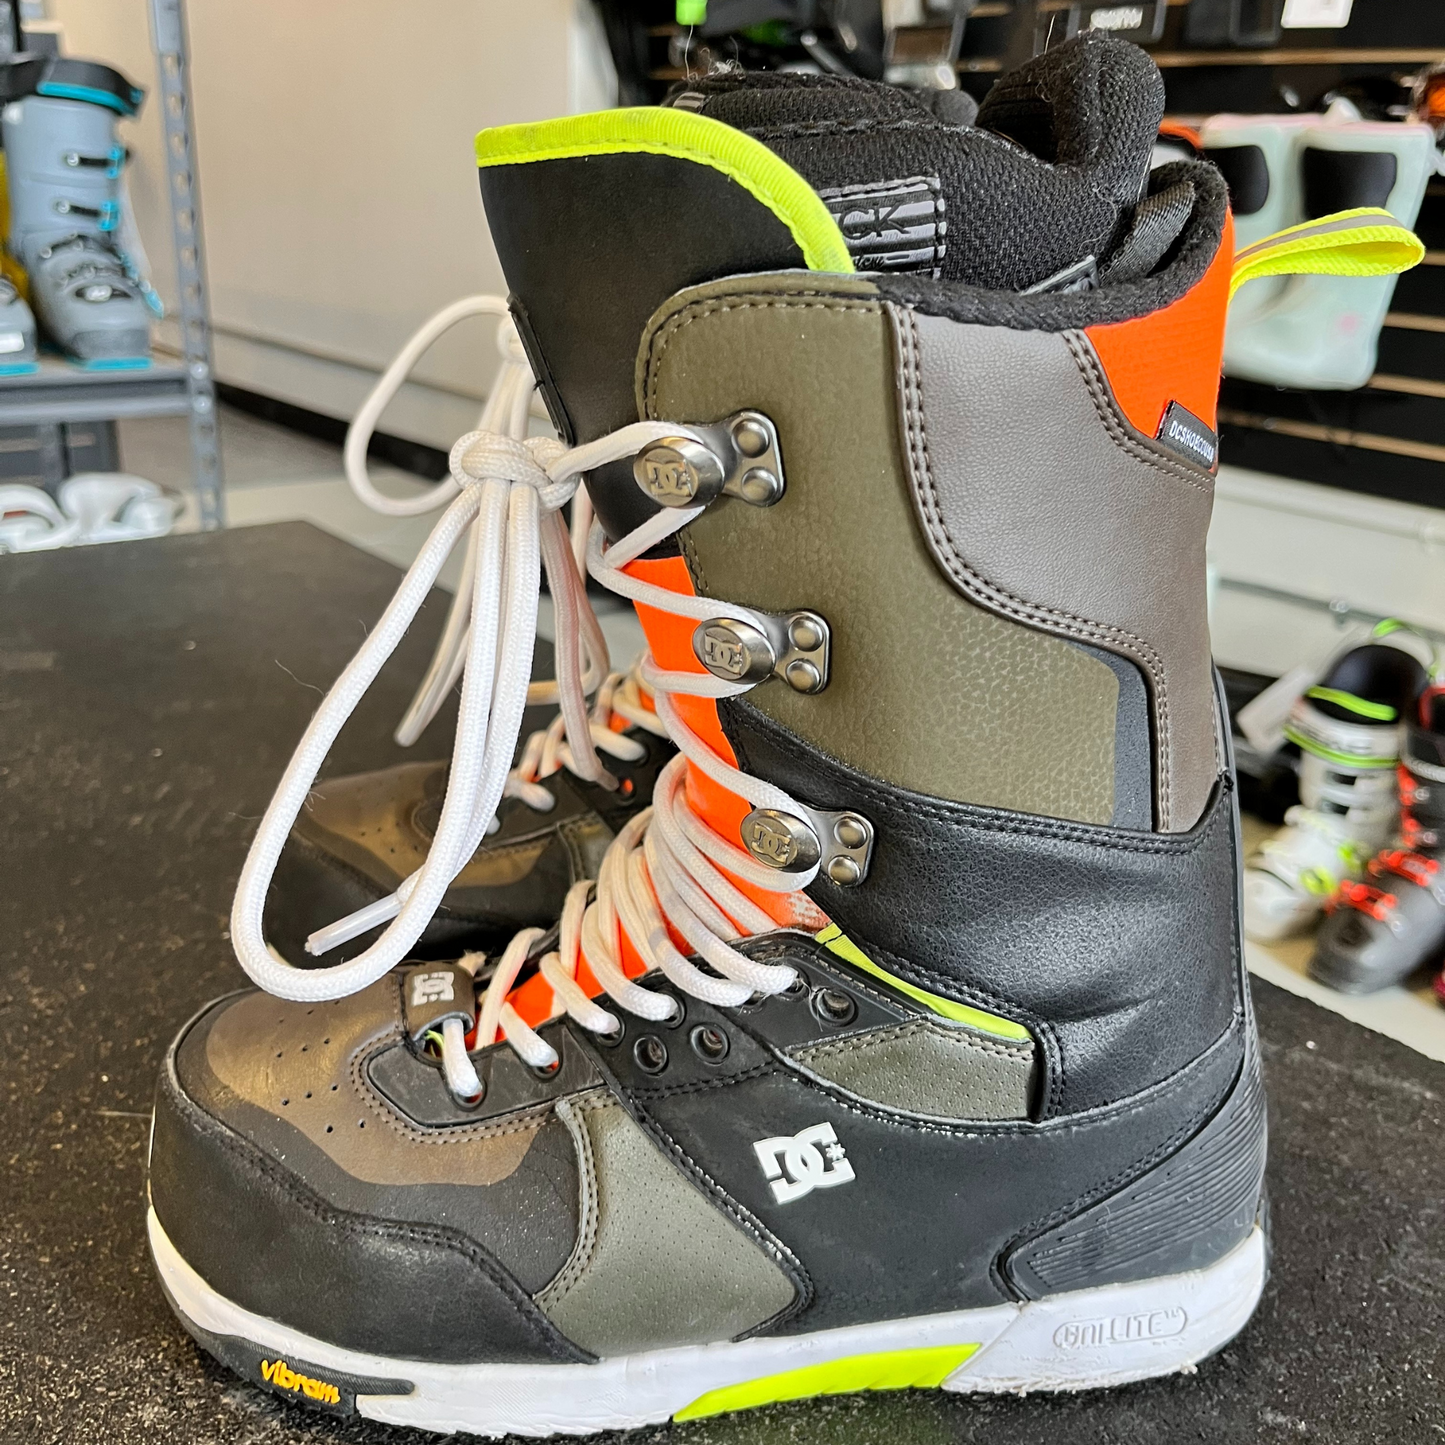 DC The Laced Boot Snowboard Boots - NEW $380